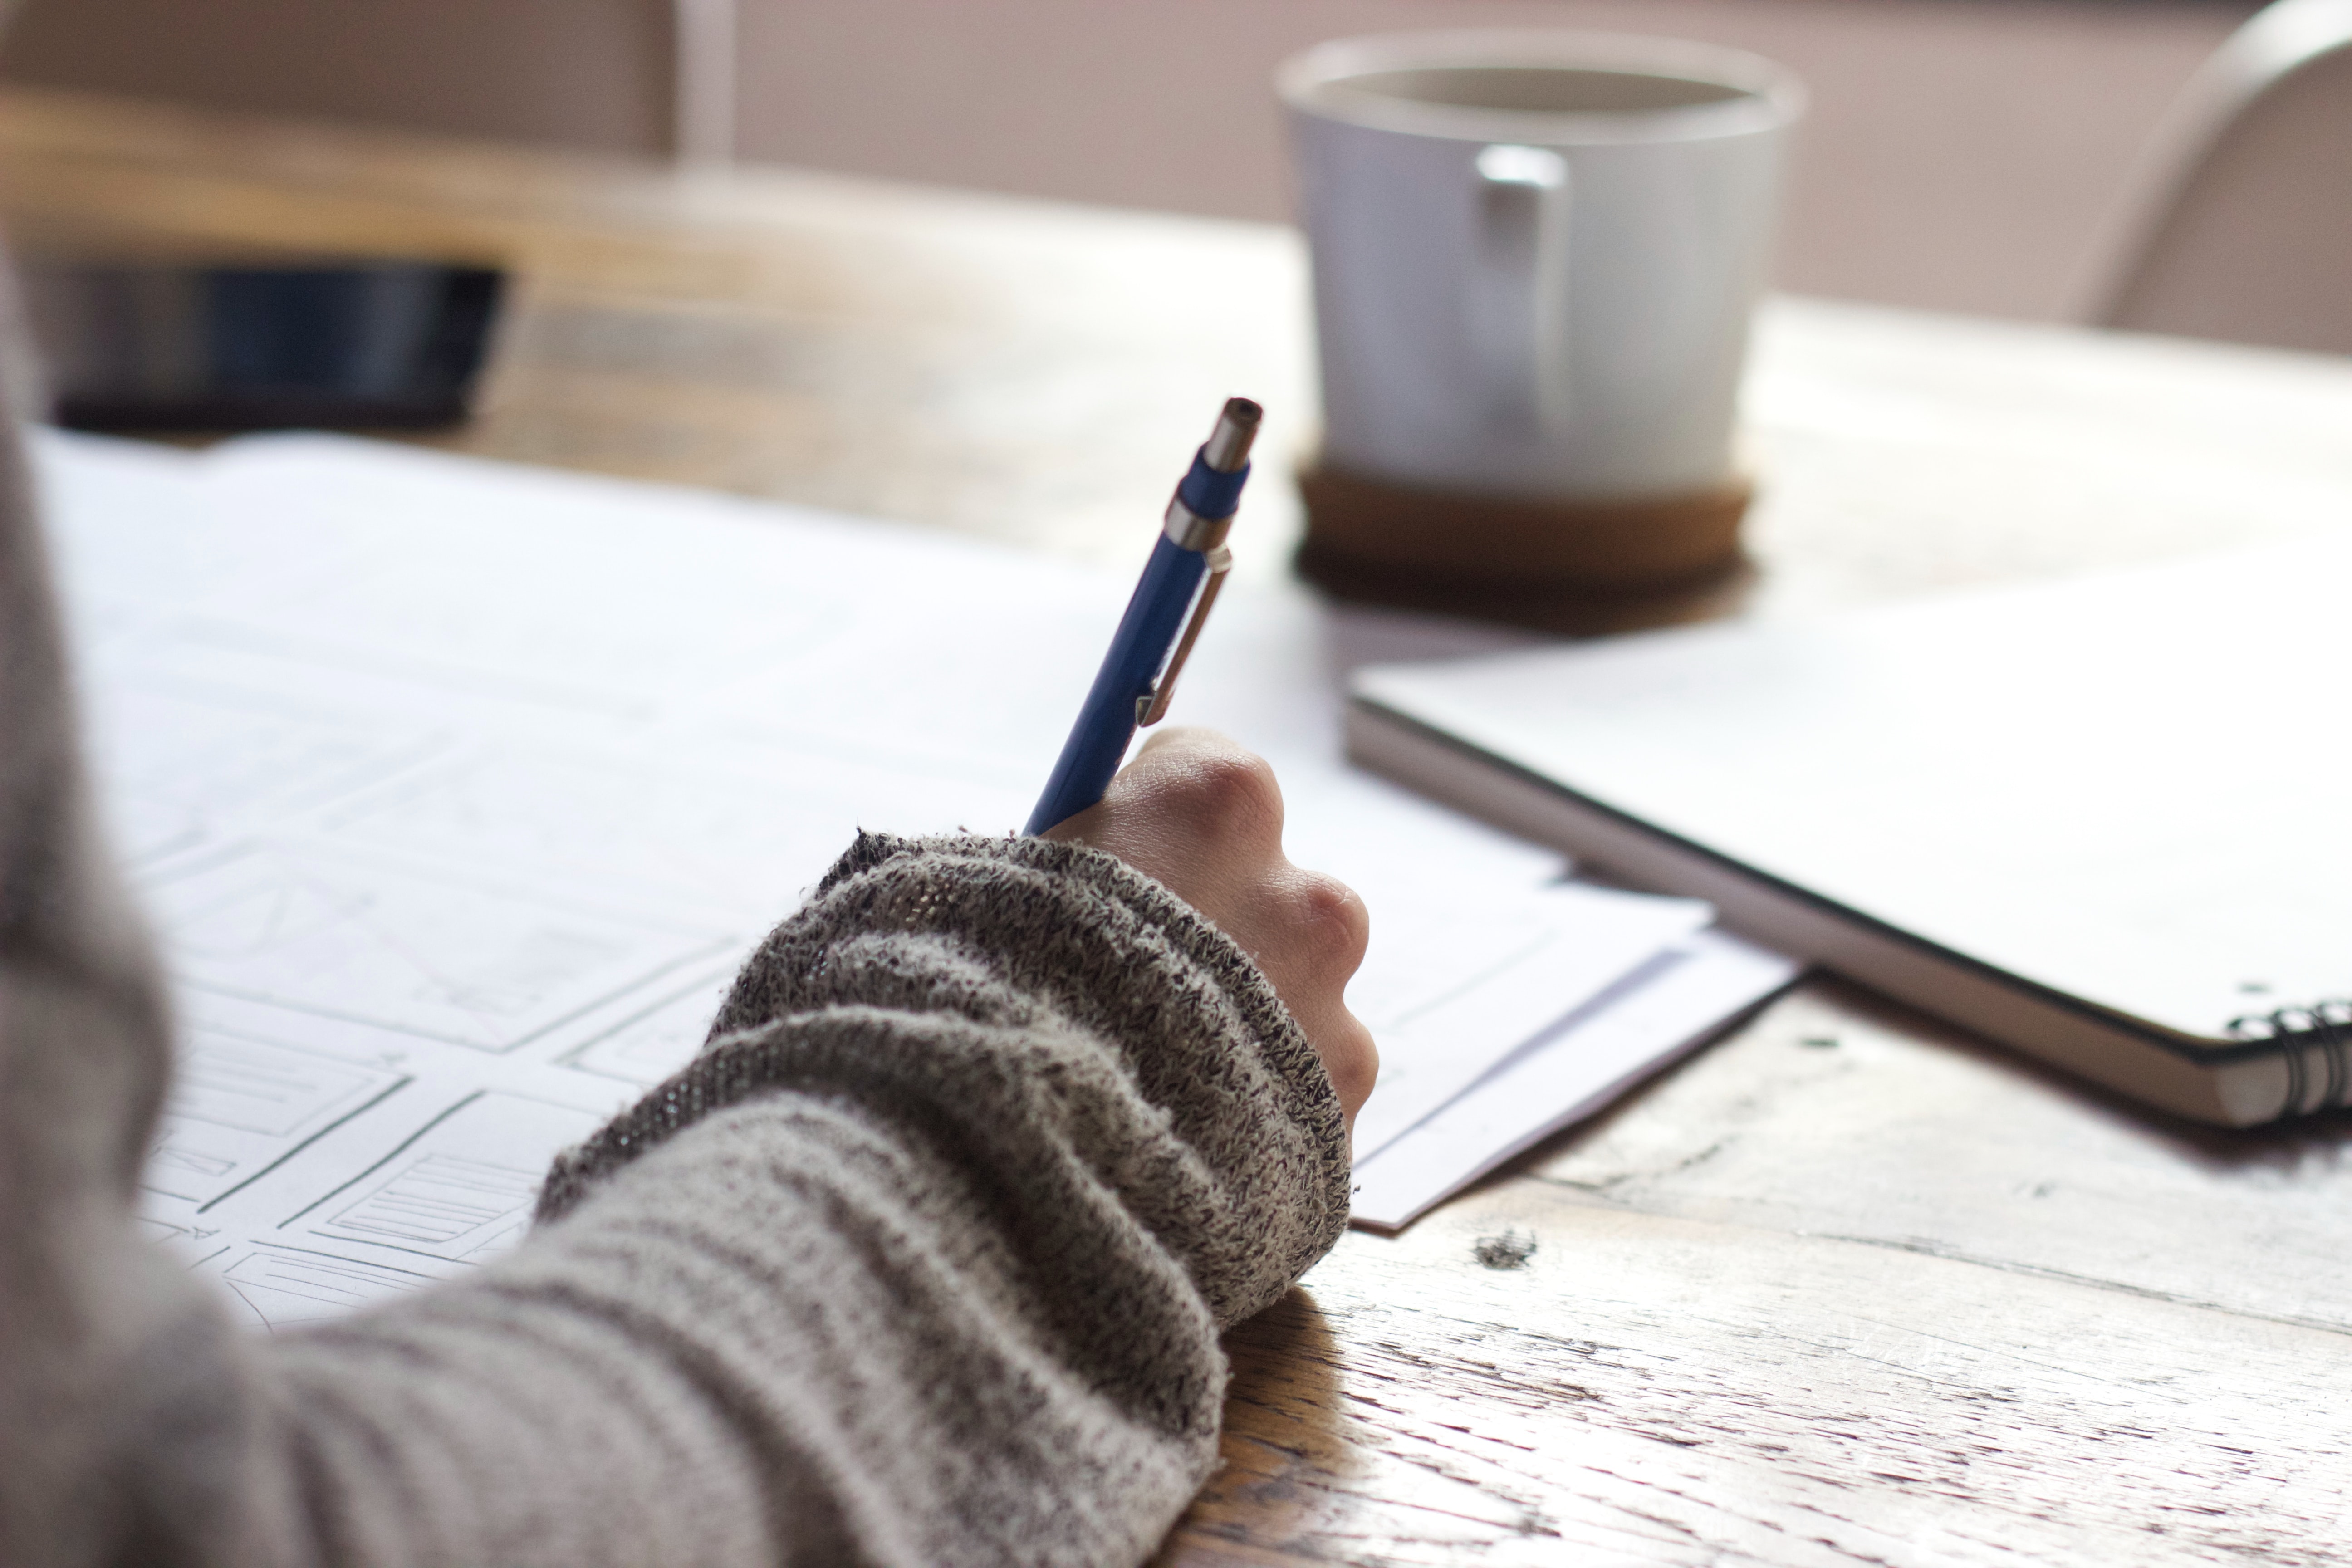 Picture of a female student wearing a long sleeved sweater writing on a paper with a notebook and cup of coffee next to her.